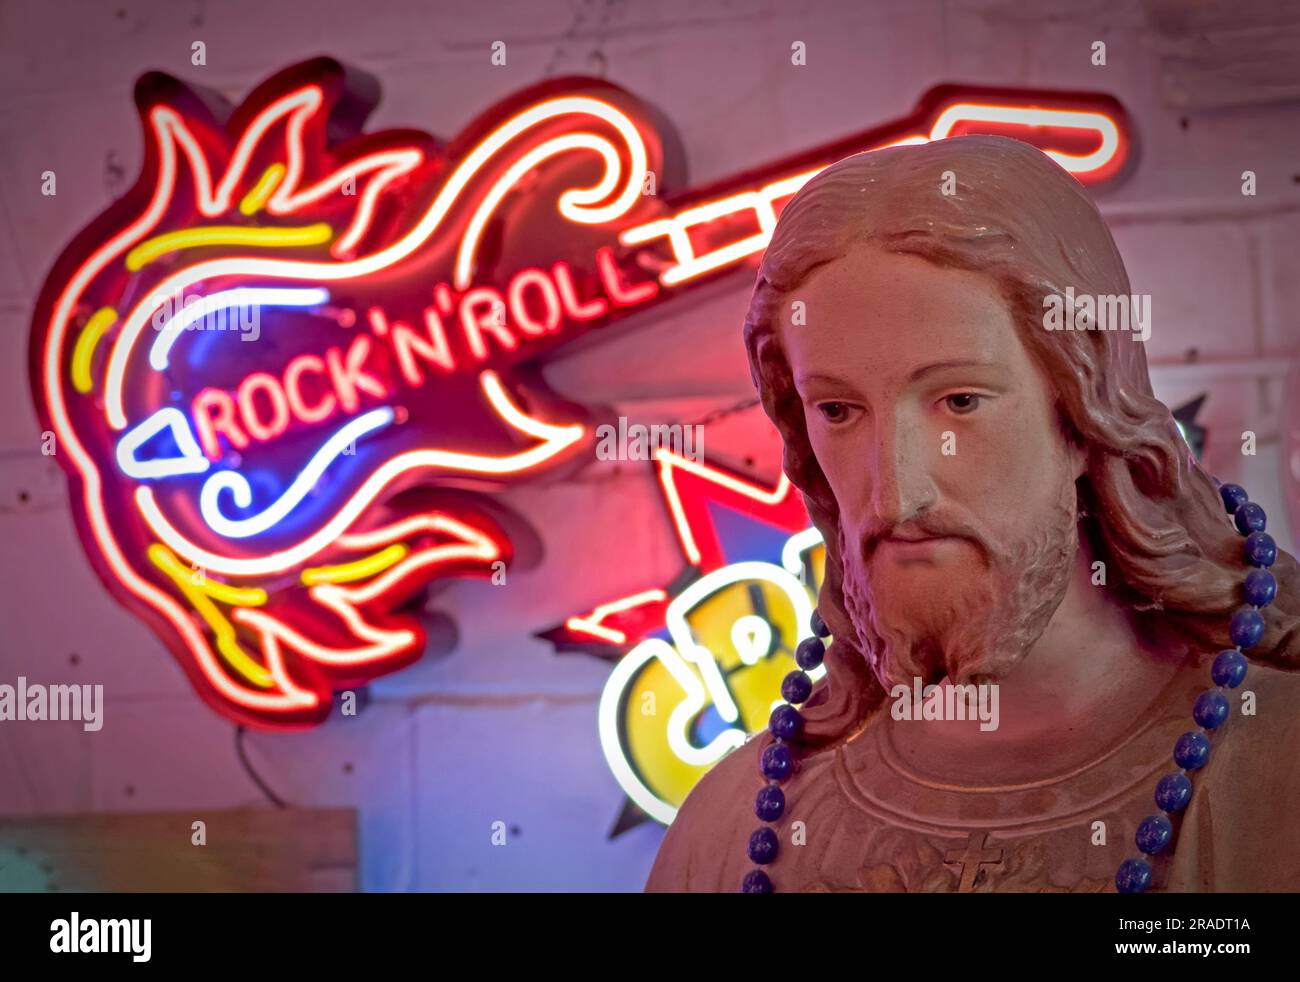 Jesus statue buddy Christ, with neon light design - Rock and Roll guitar Stock Photo